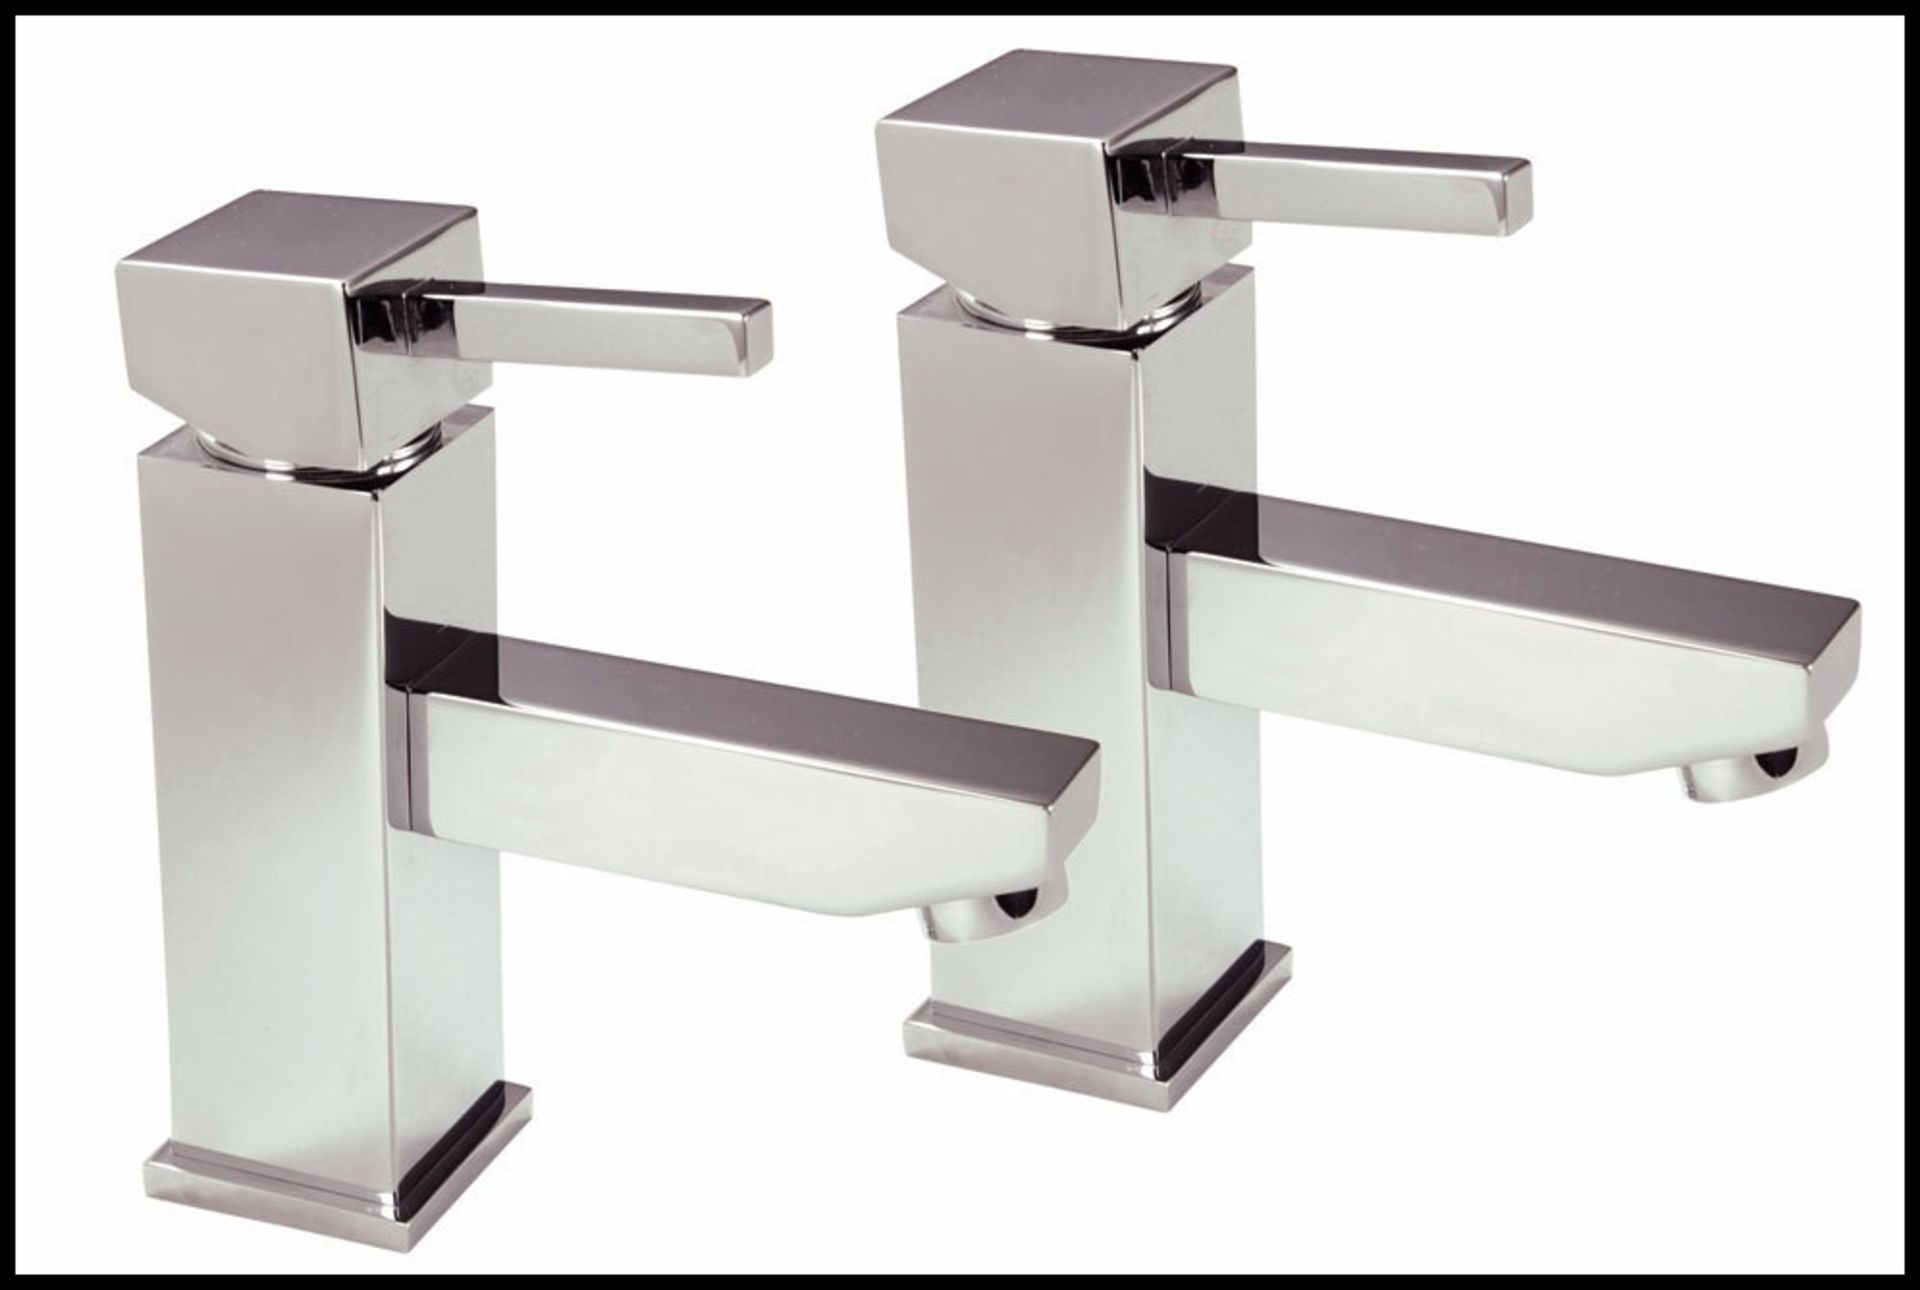 1 x Verona Set of Basin Taps - Vogue Bathrooms - Contemporary Basin Taps With Bright Chrome Finish - - Image 3 of 10